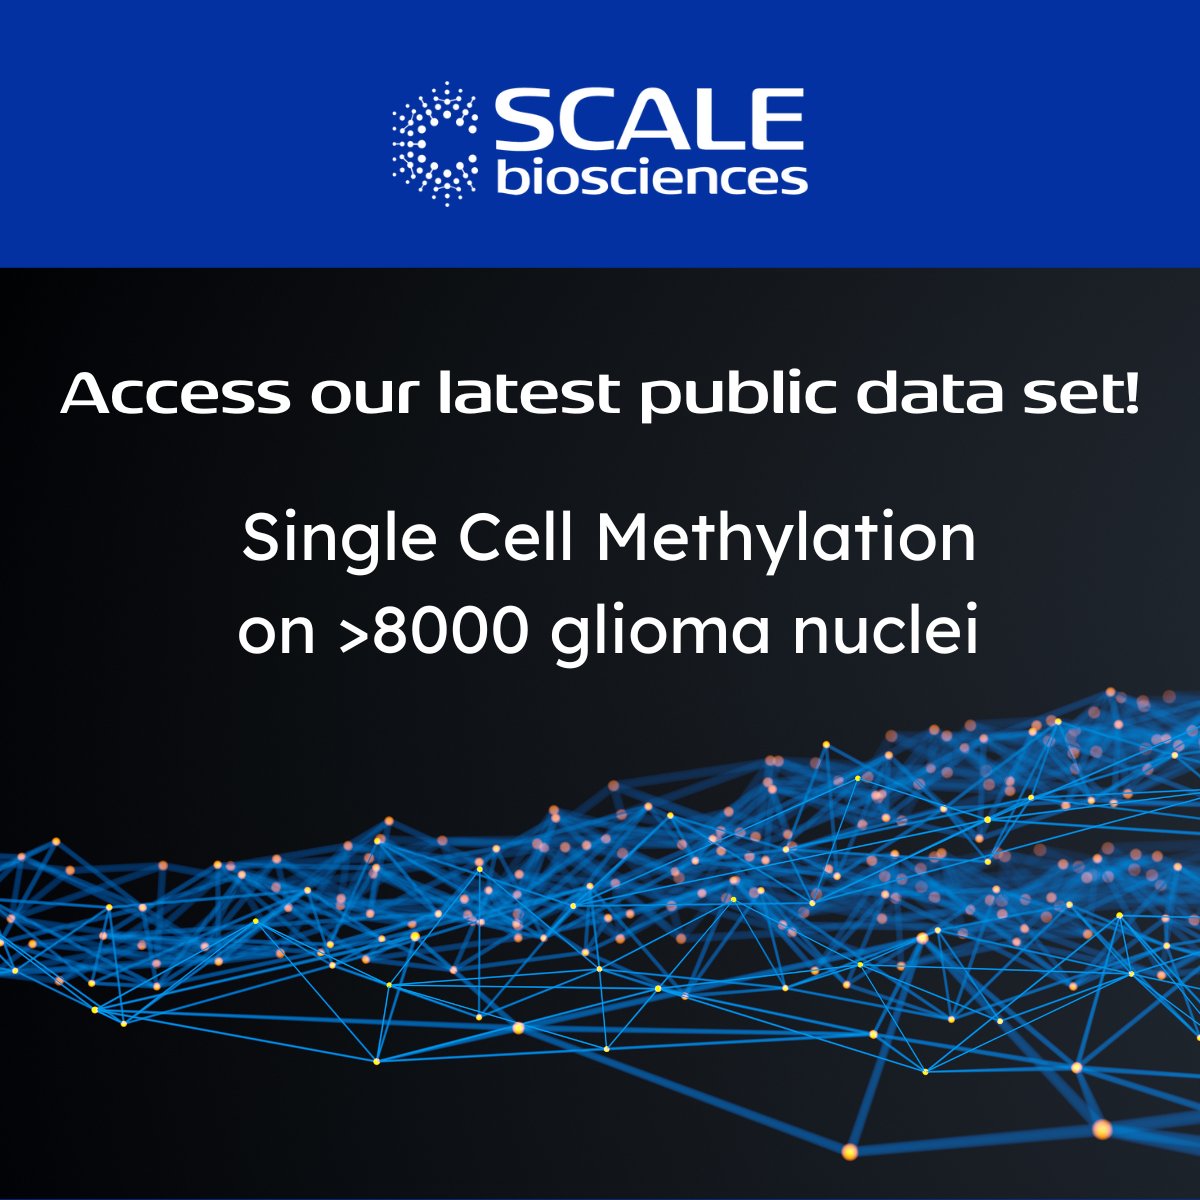 Access our latest publicly available data set! This single cell DNA methylation data set containing more than 8,000 single glioma nuclei resolves cell types and methylation signatures. Get Access: zurl.co/agFJ